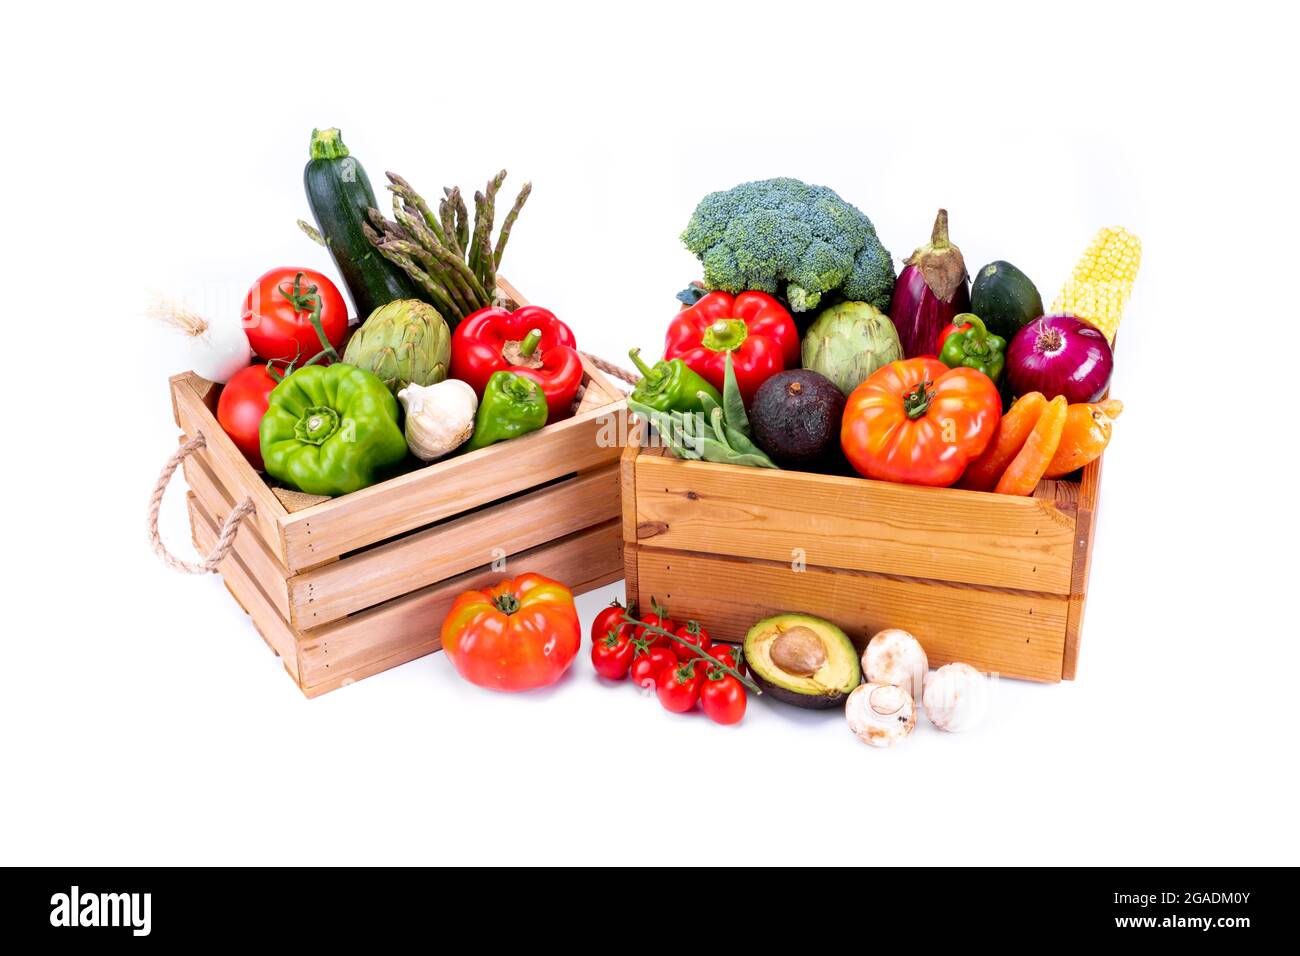 Healthy fresh vegetables in wooden boxes on white background, healthy food Stock Photo